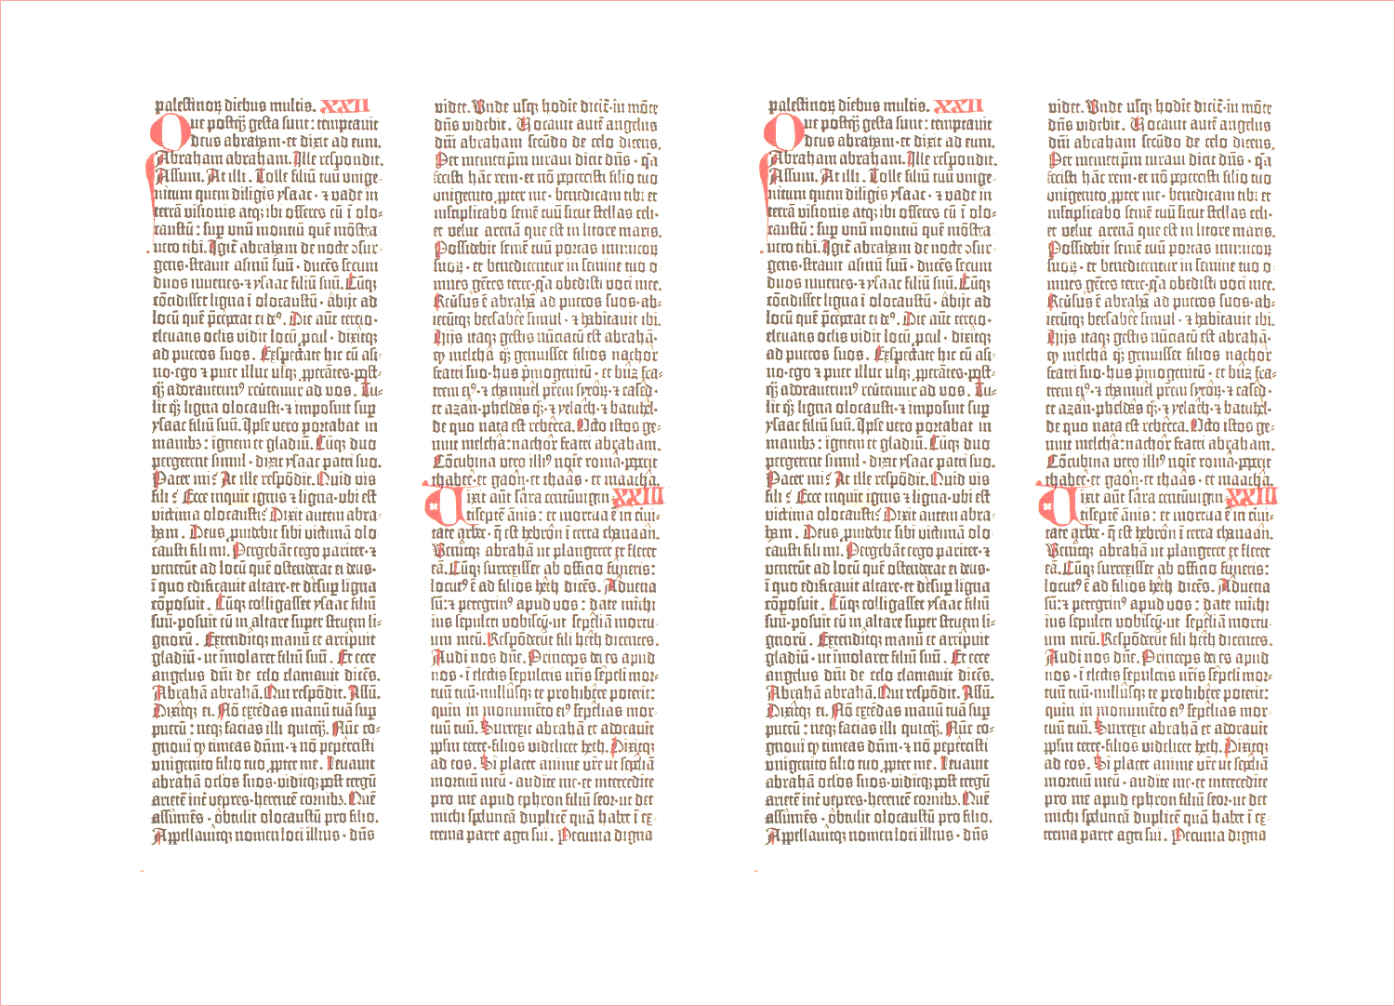 The first edition of the Gutenberg Bible (~1454) used two printing passes, with the second for rubrication, but switched to a single pass & hand rubrication. (Rubrication was often used on ‘caput’/​pilcrow symbols to denote paragraphs and other separations inline; a fun homage is Dowling & Duncan’s exhibit on the Charter of the Forest.)